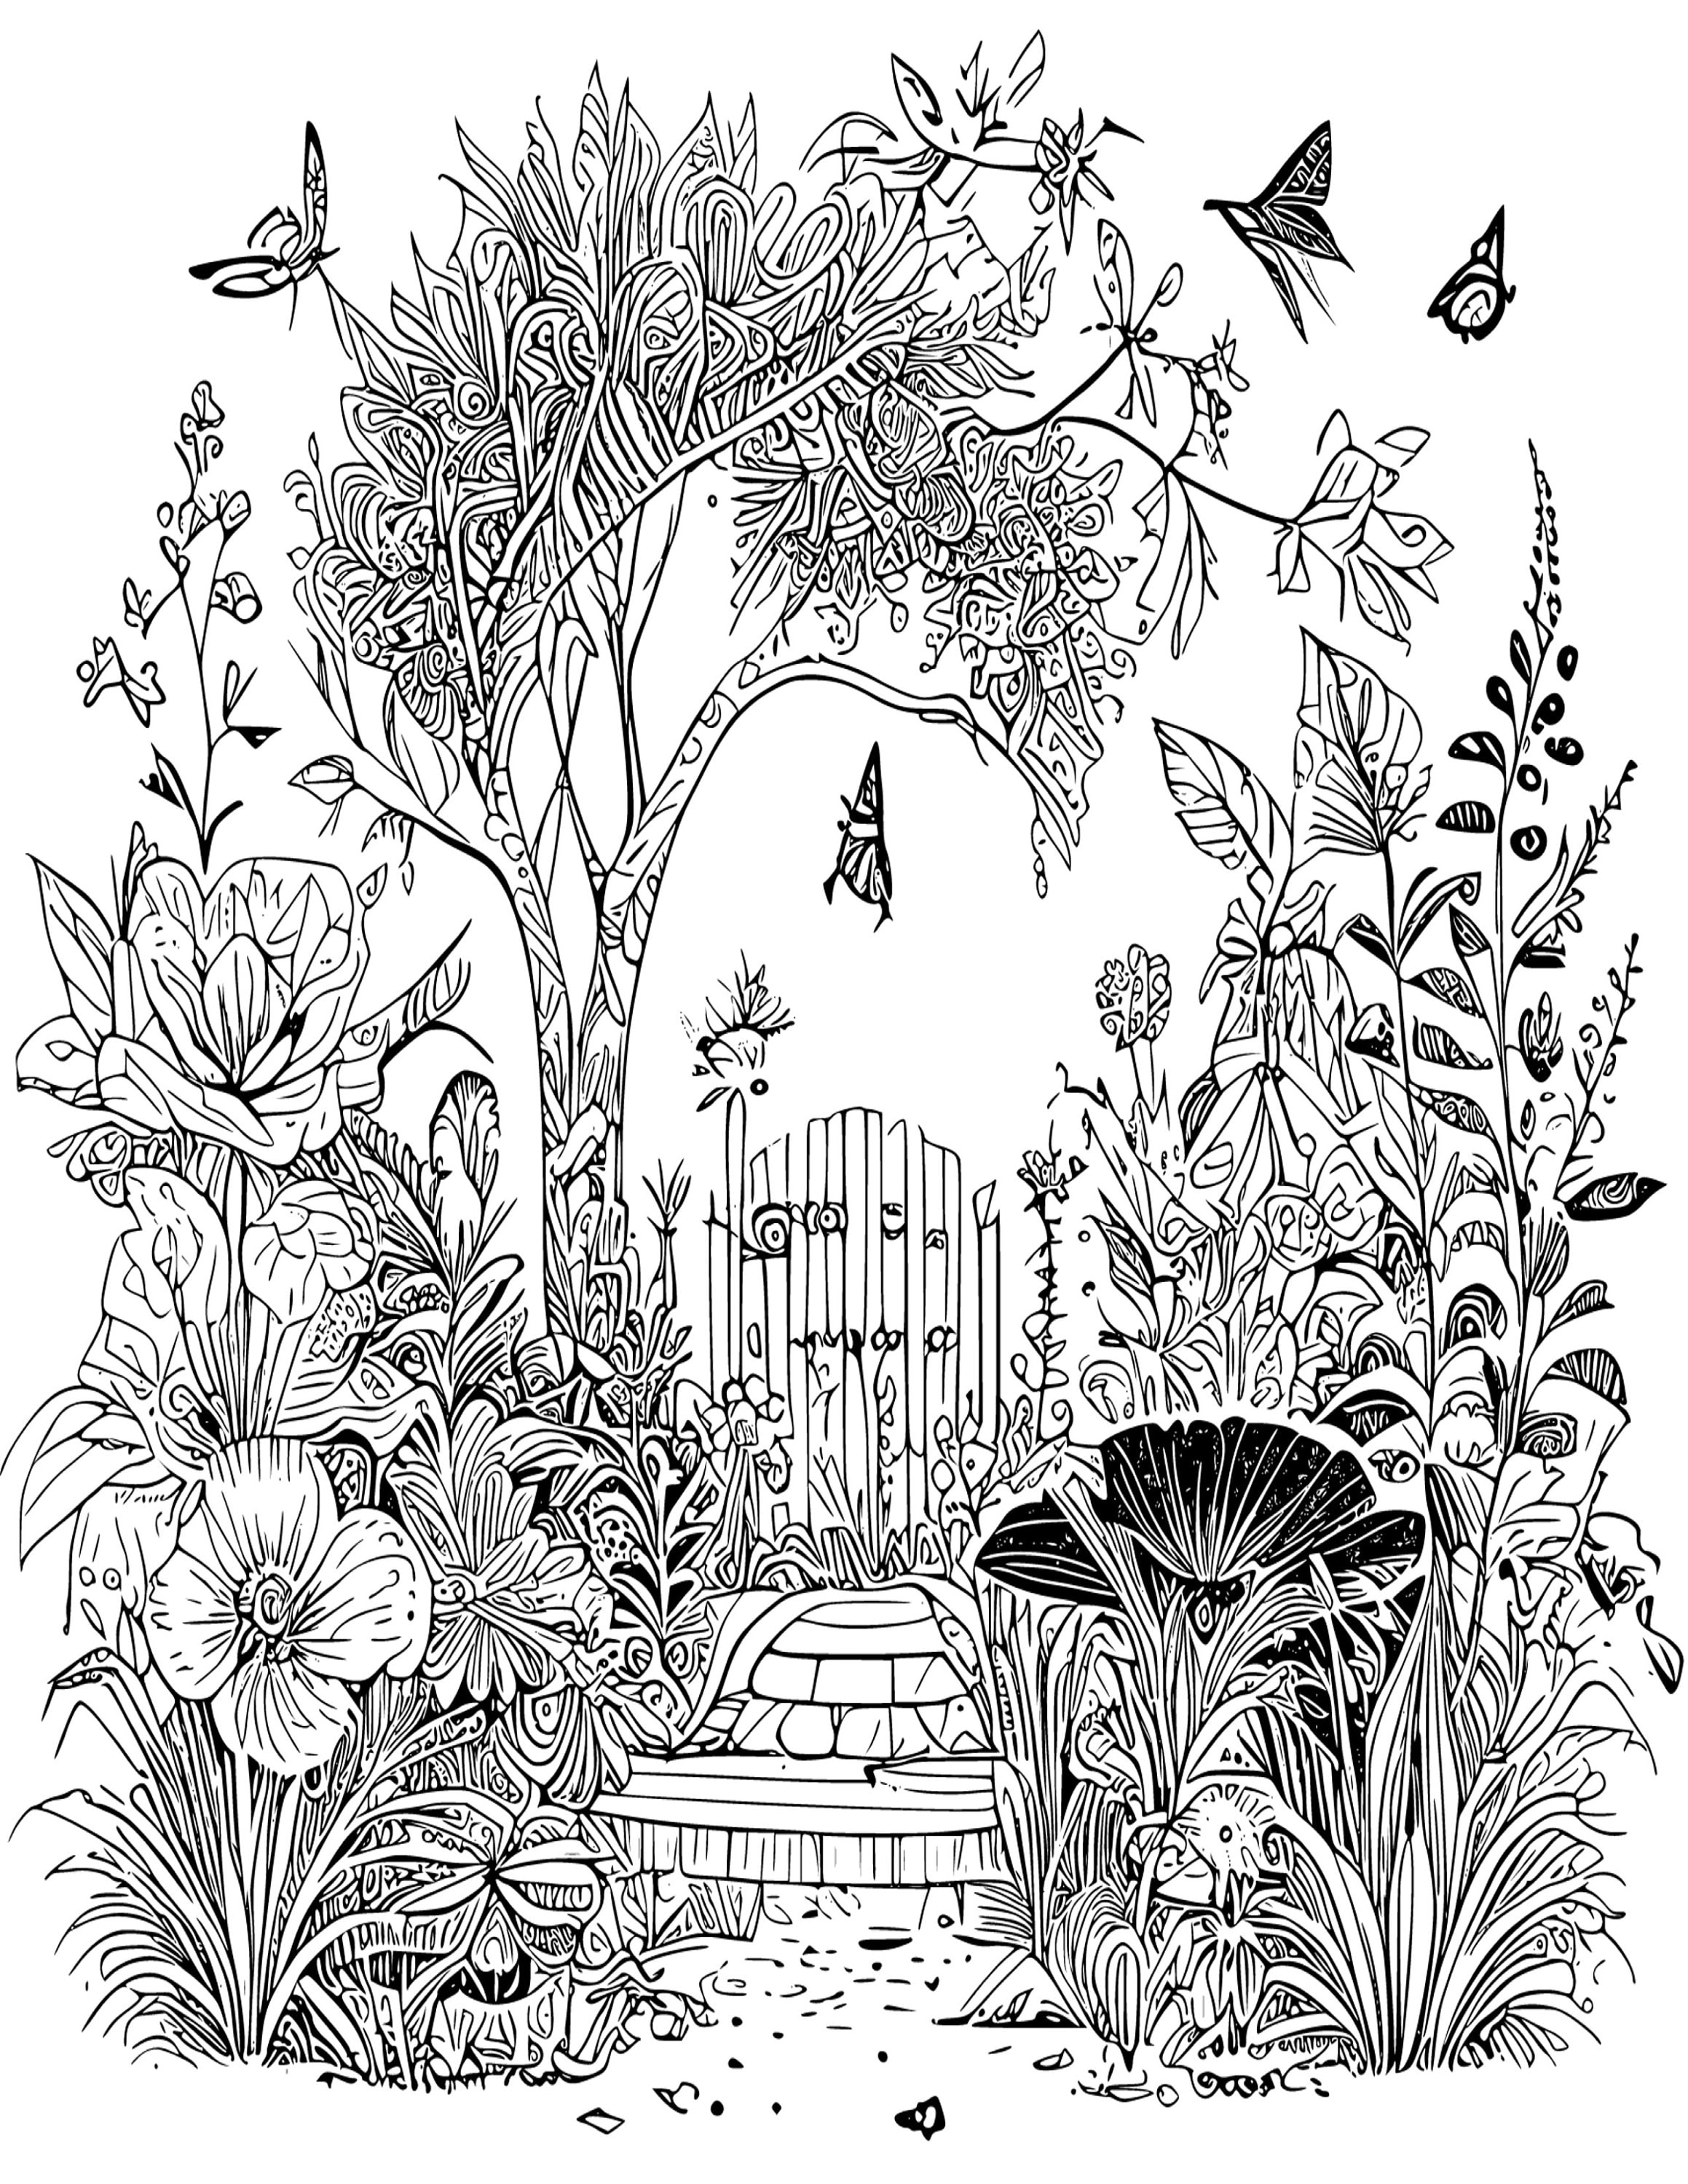 Book fantasy garden adult grayscale coloring pages fairy gardens adult printable book digital download not a physical product instant download